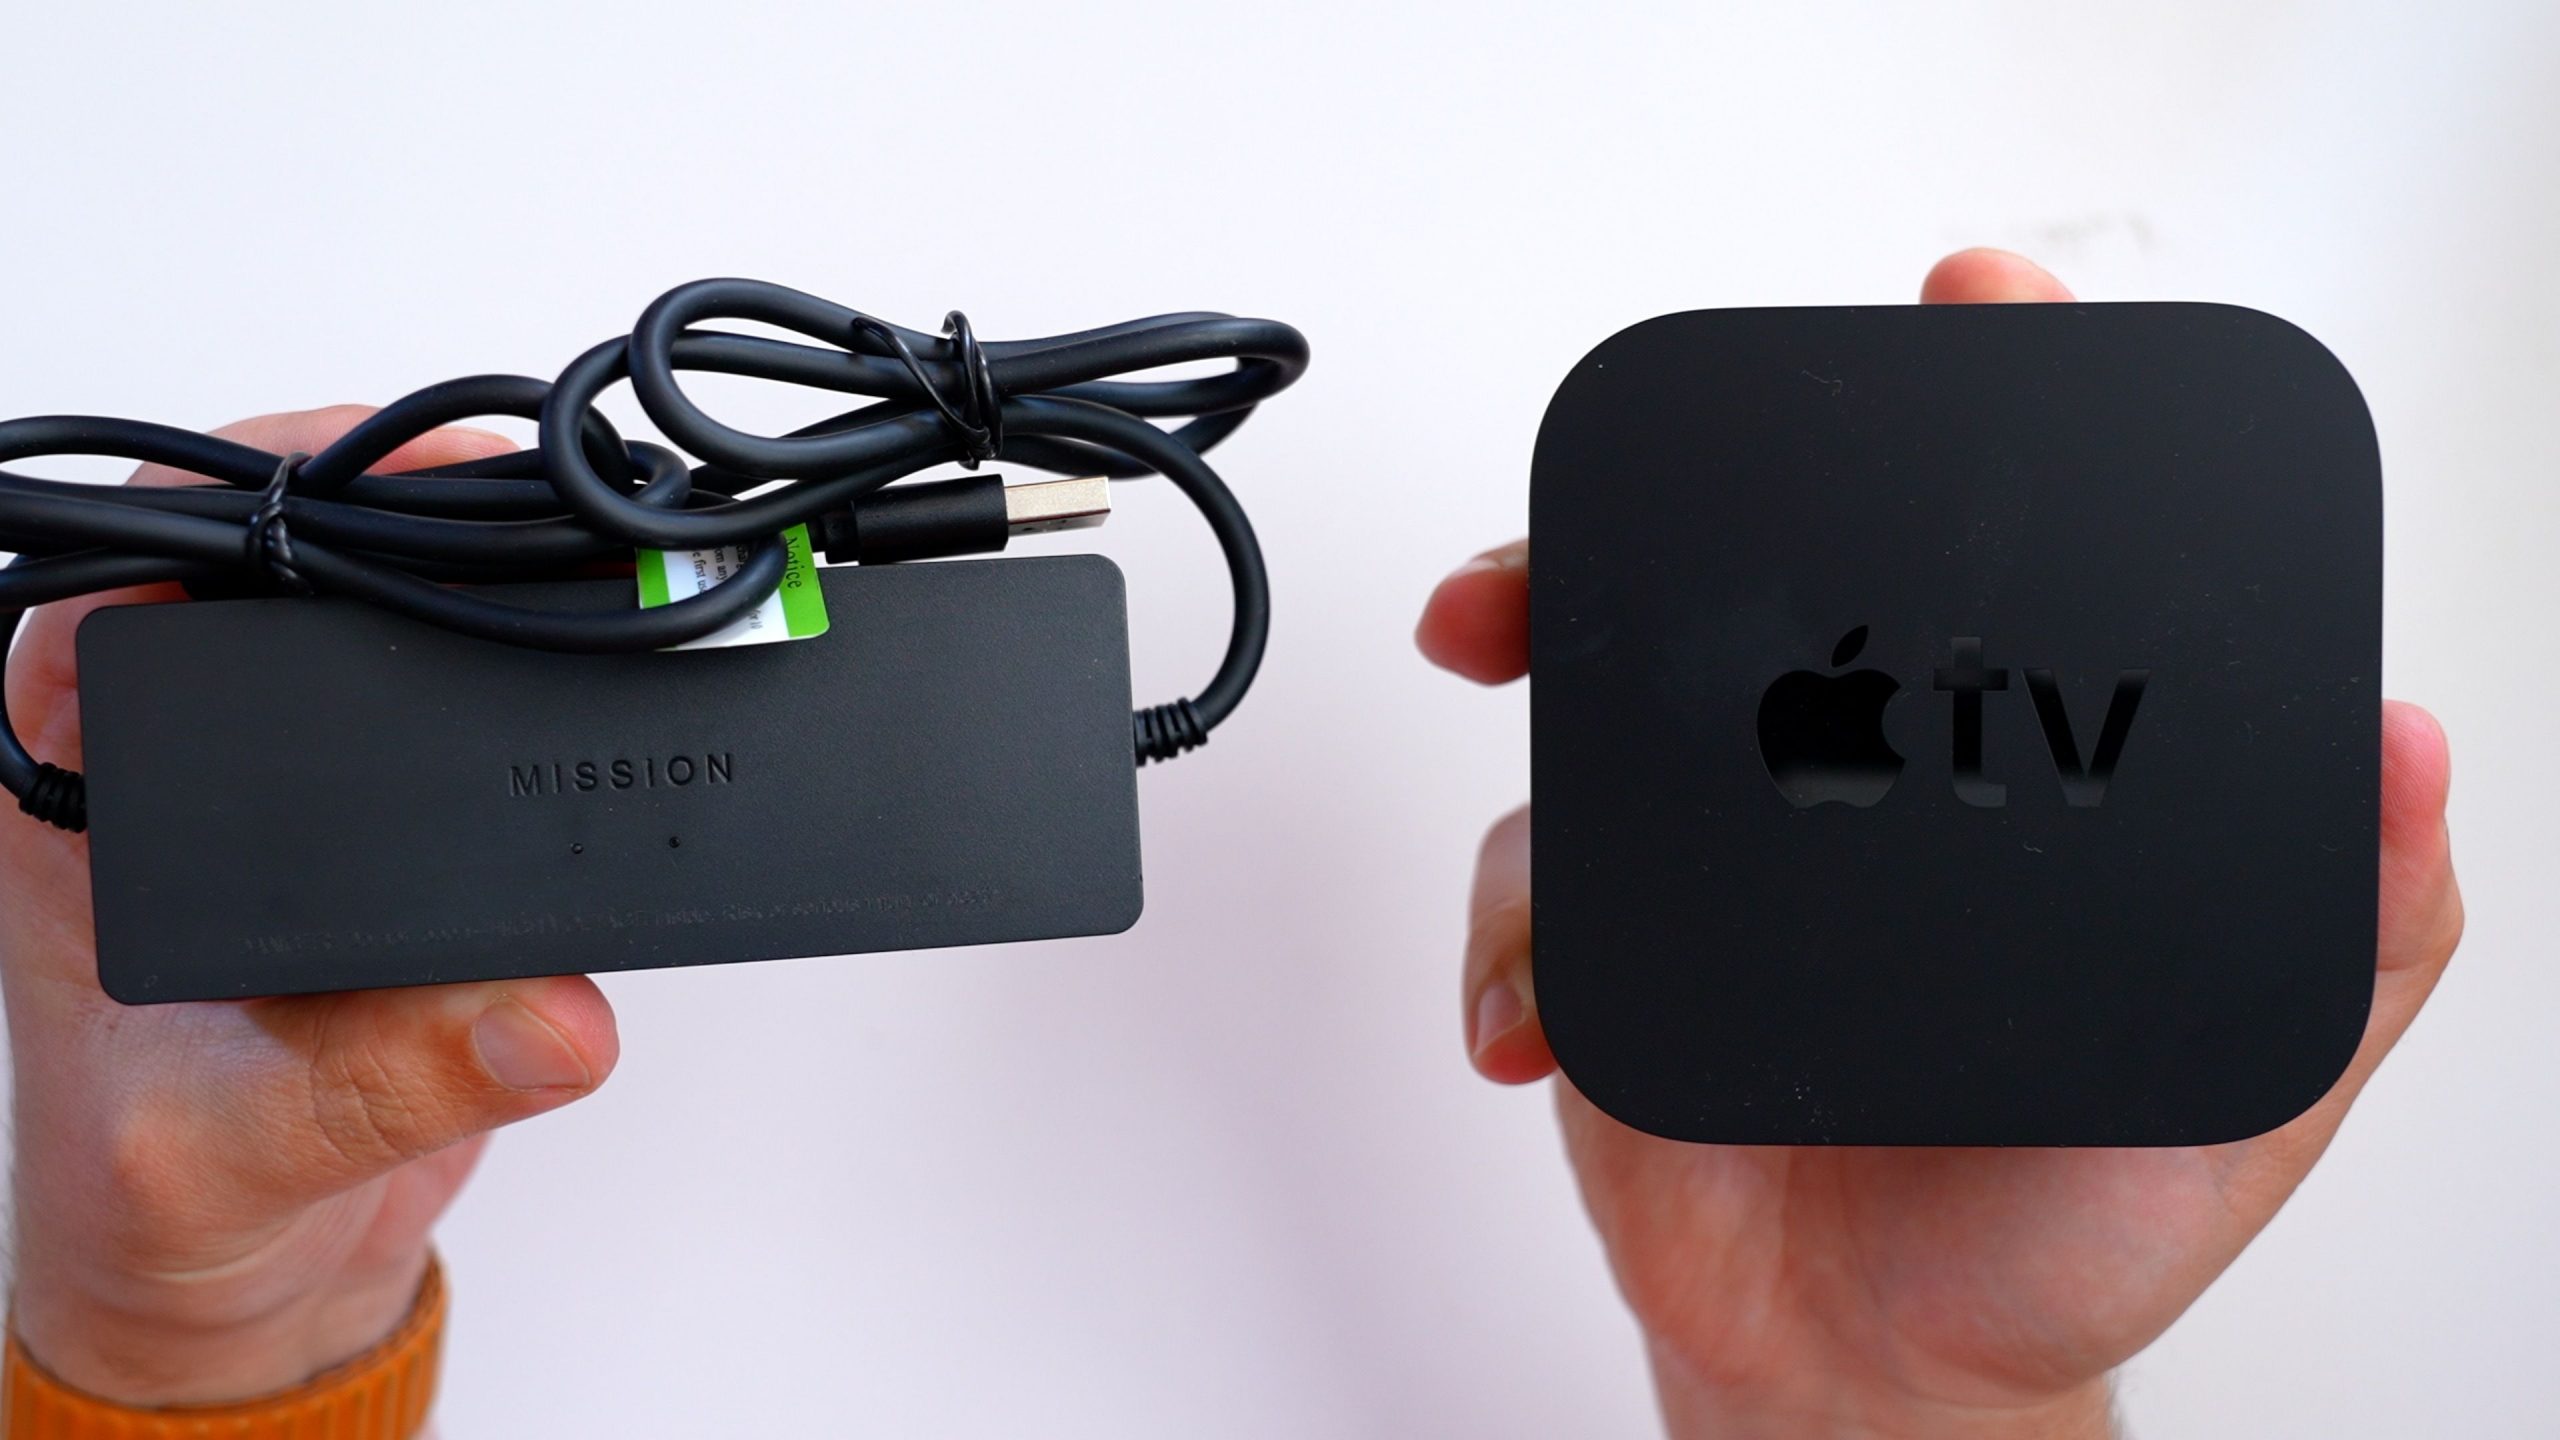 Hands On: Mission's USB Power Cable Lets You Plug Your Apple TV Directly Into Your TV Set